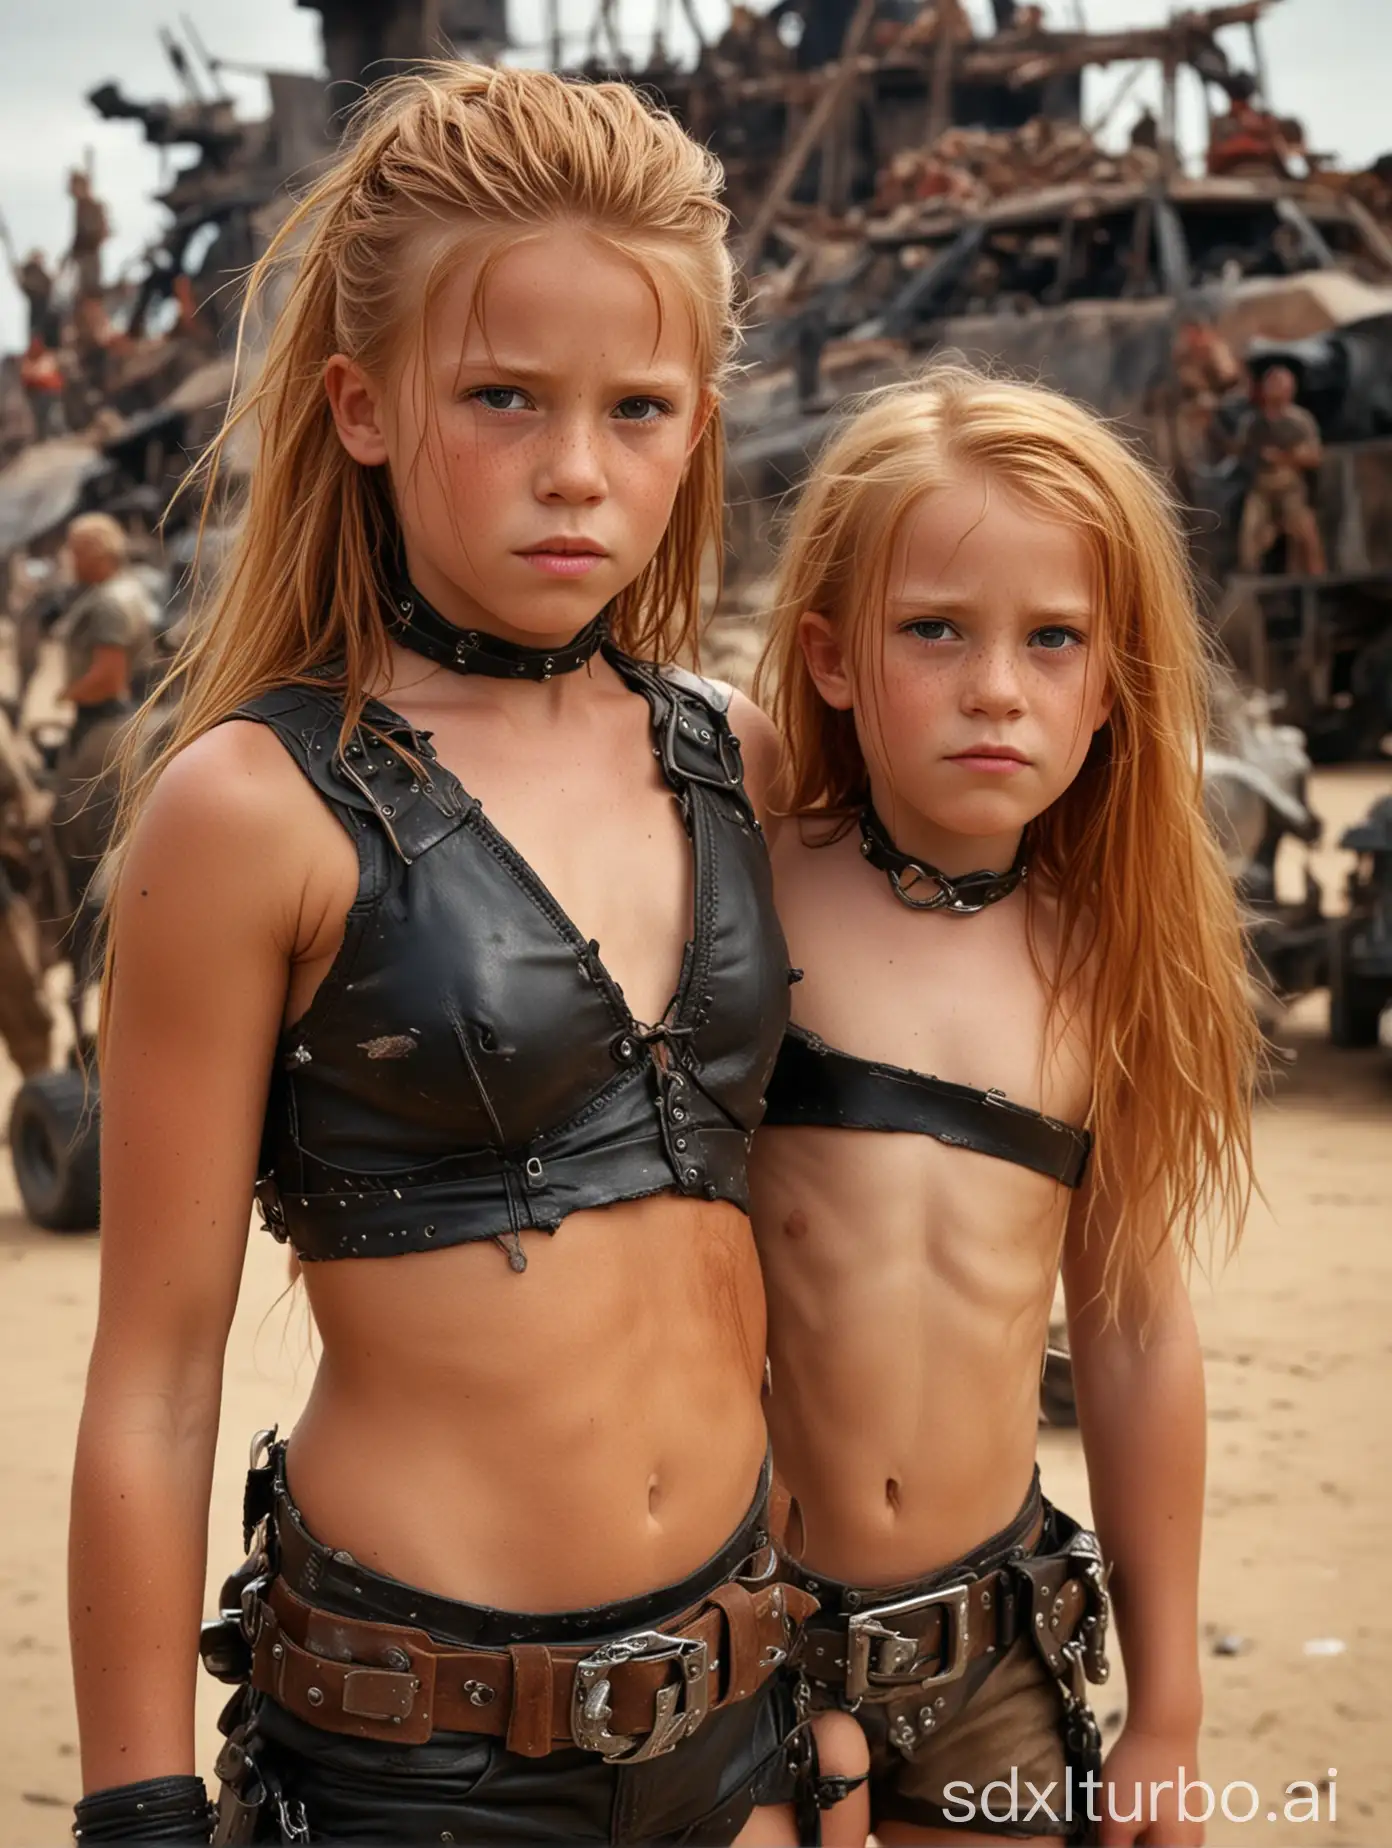 Young-Warrior-with-Muscular-Build-and-Ginger-Hair-in-Mad-Max-Setting